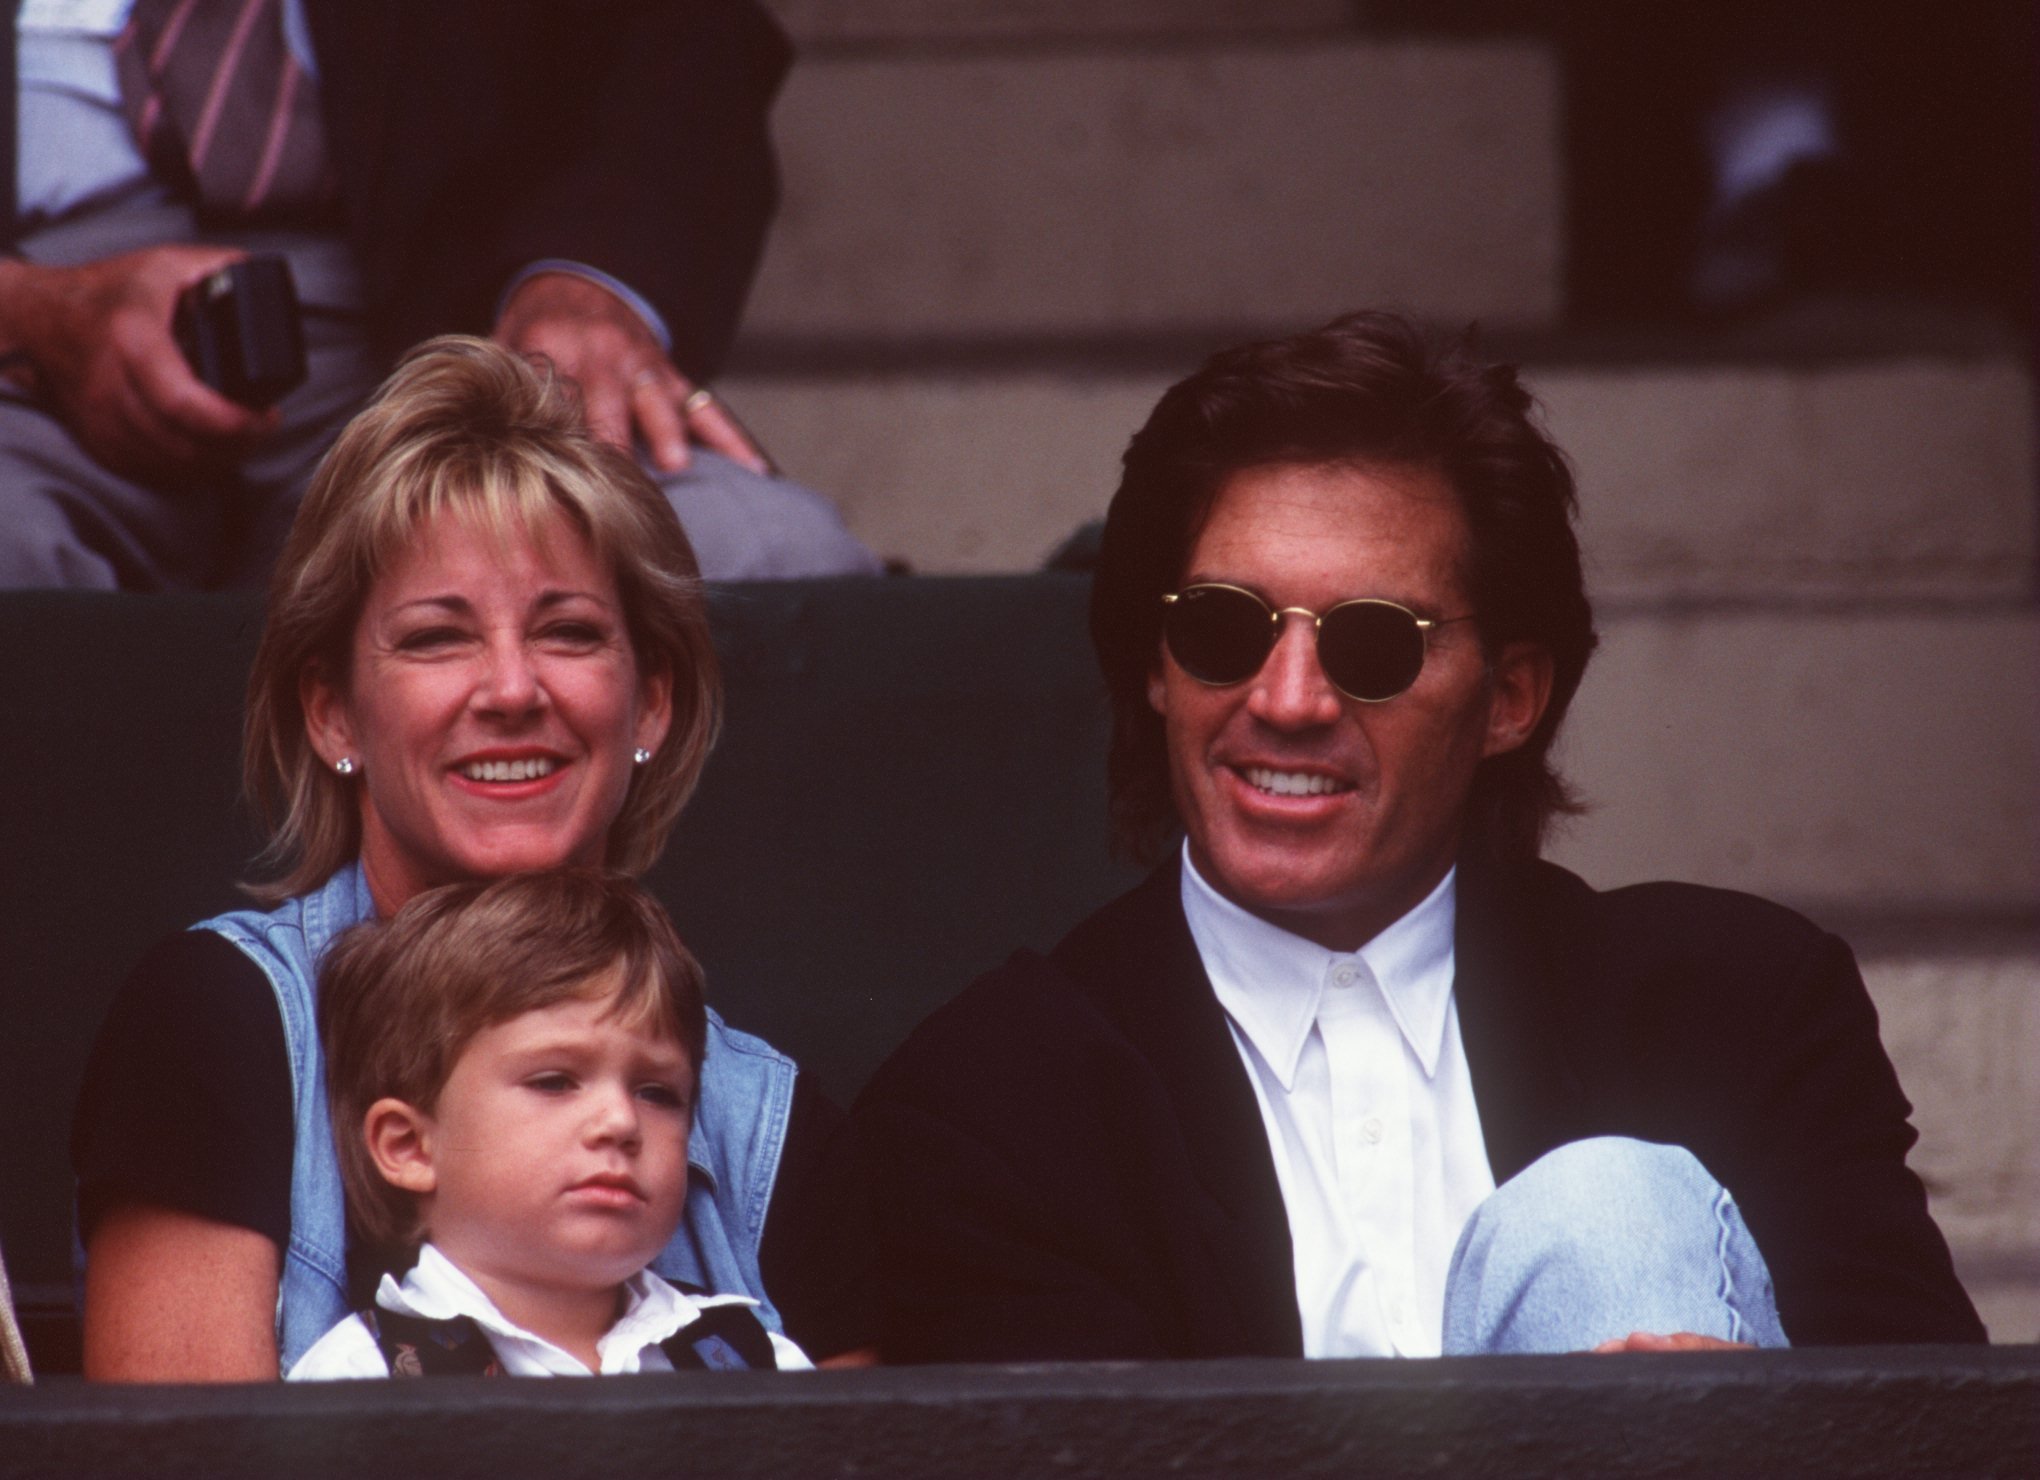 Chris Evert's Children The Tennis Legend Has Three Sons from Her